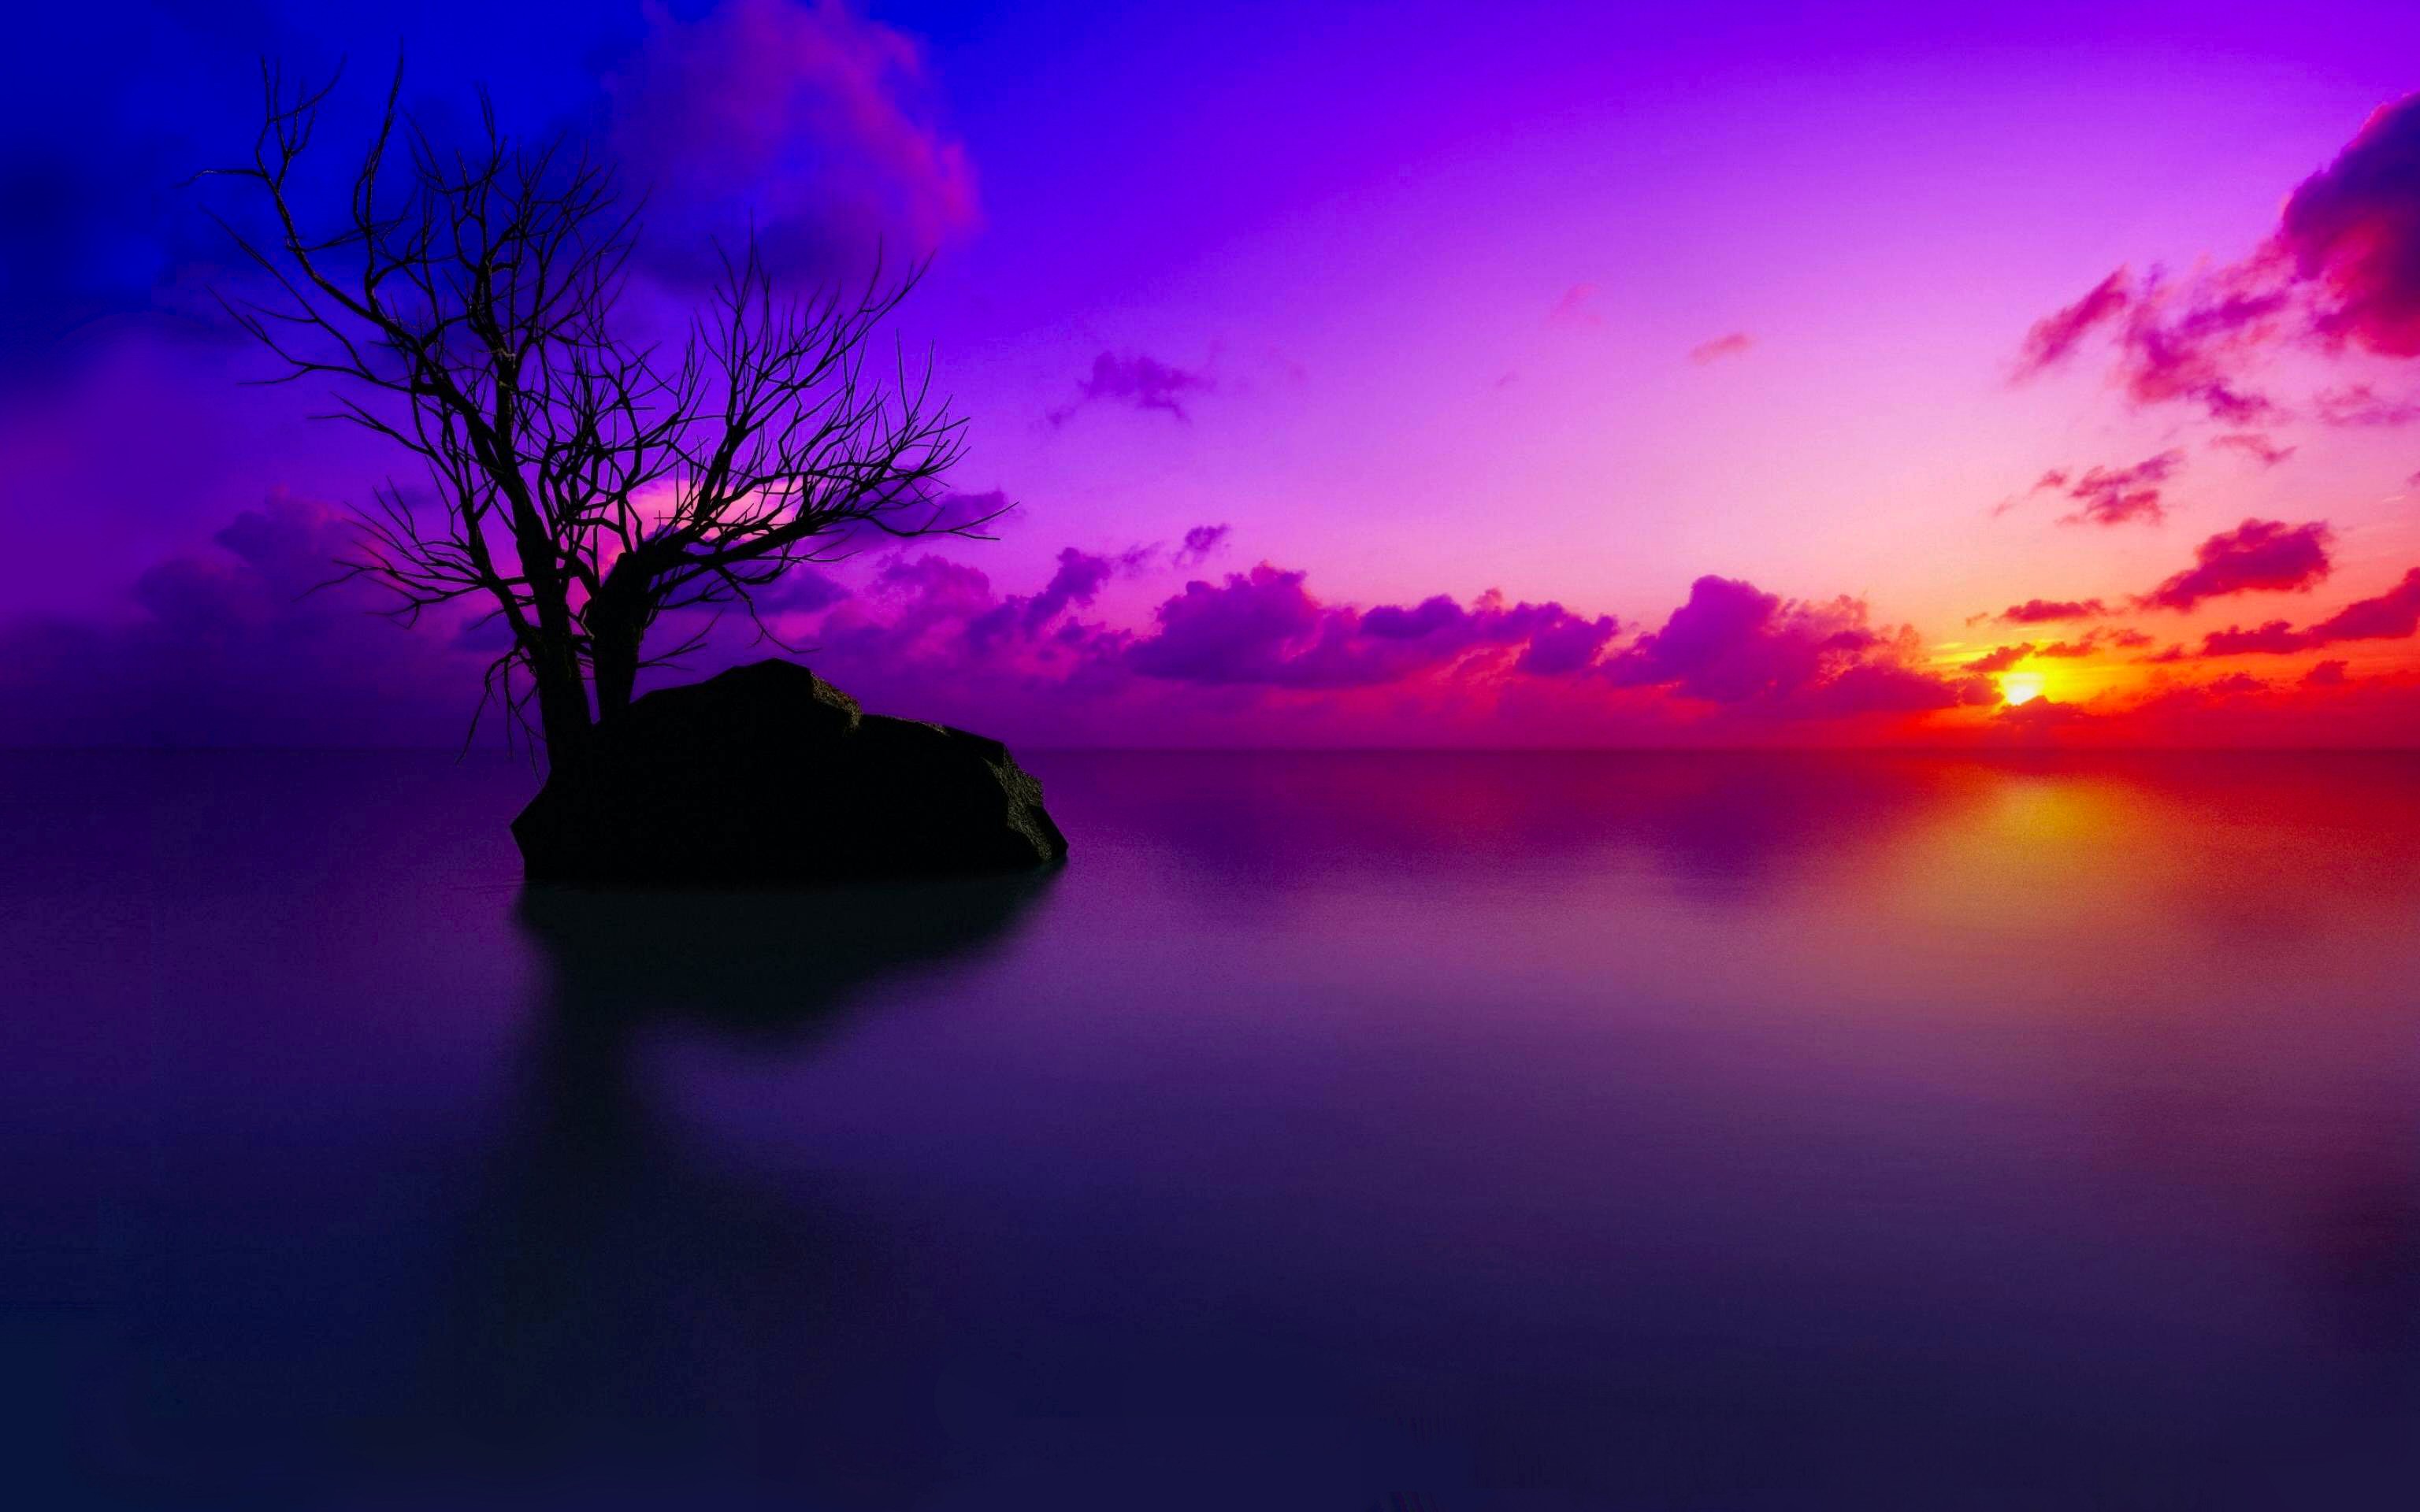  Purple HD Wallpapers Background Images